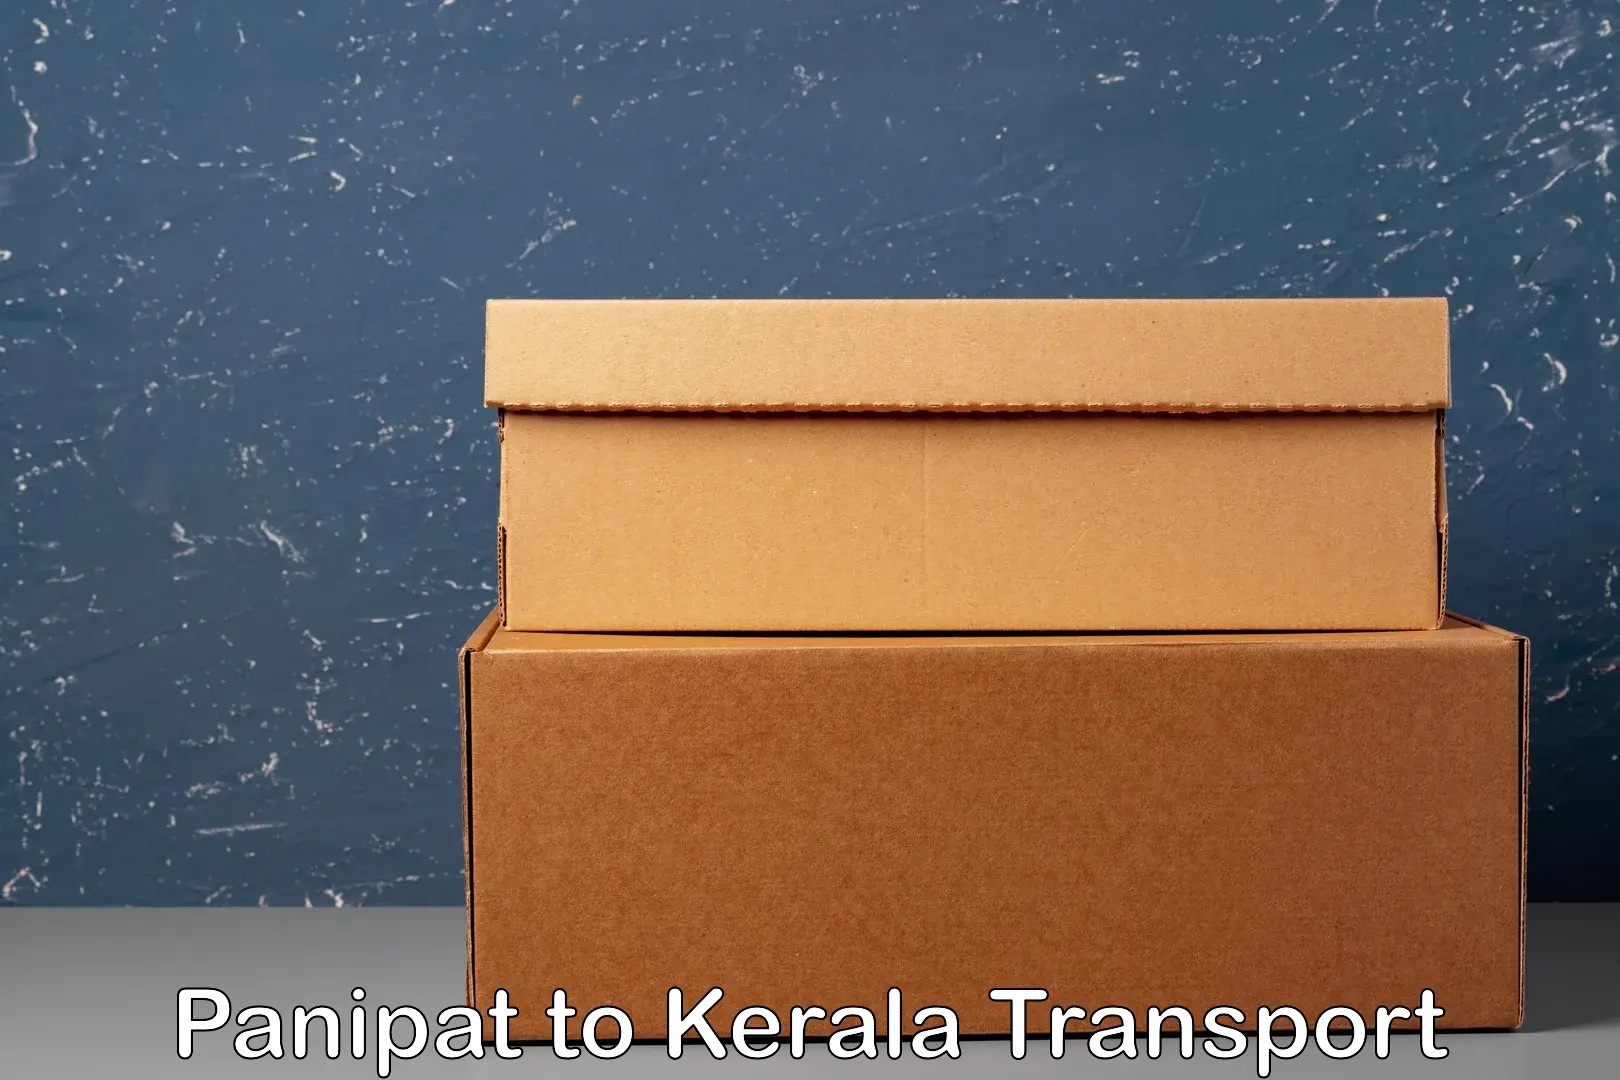 Transport bike from one state to another Panipat to Kerala